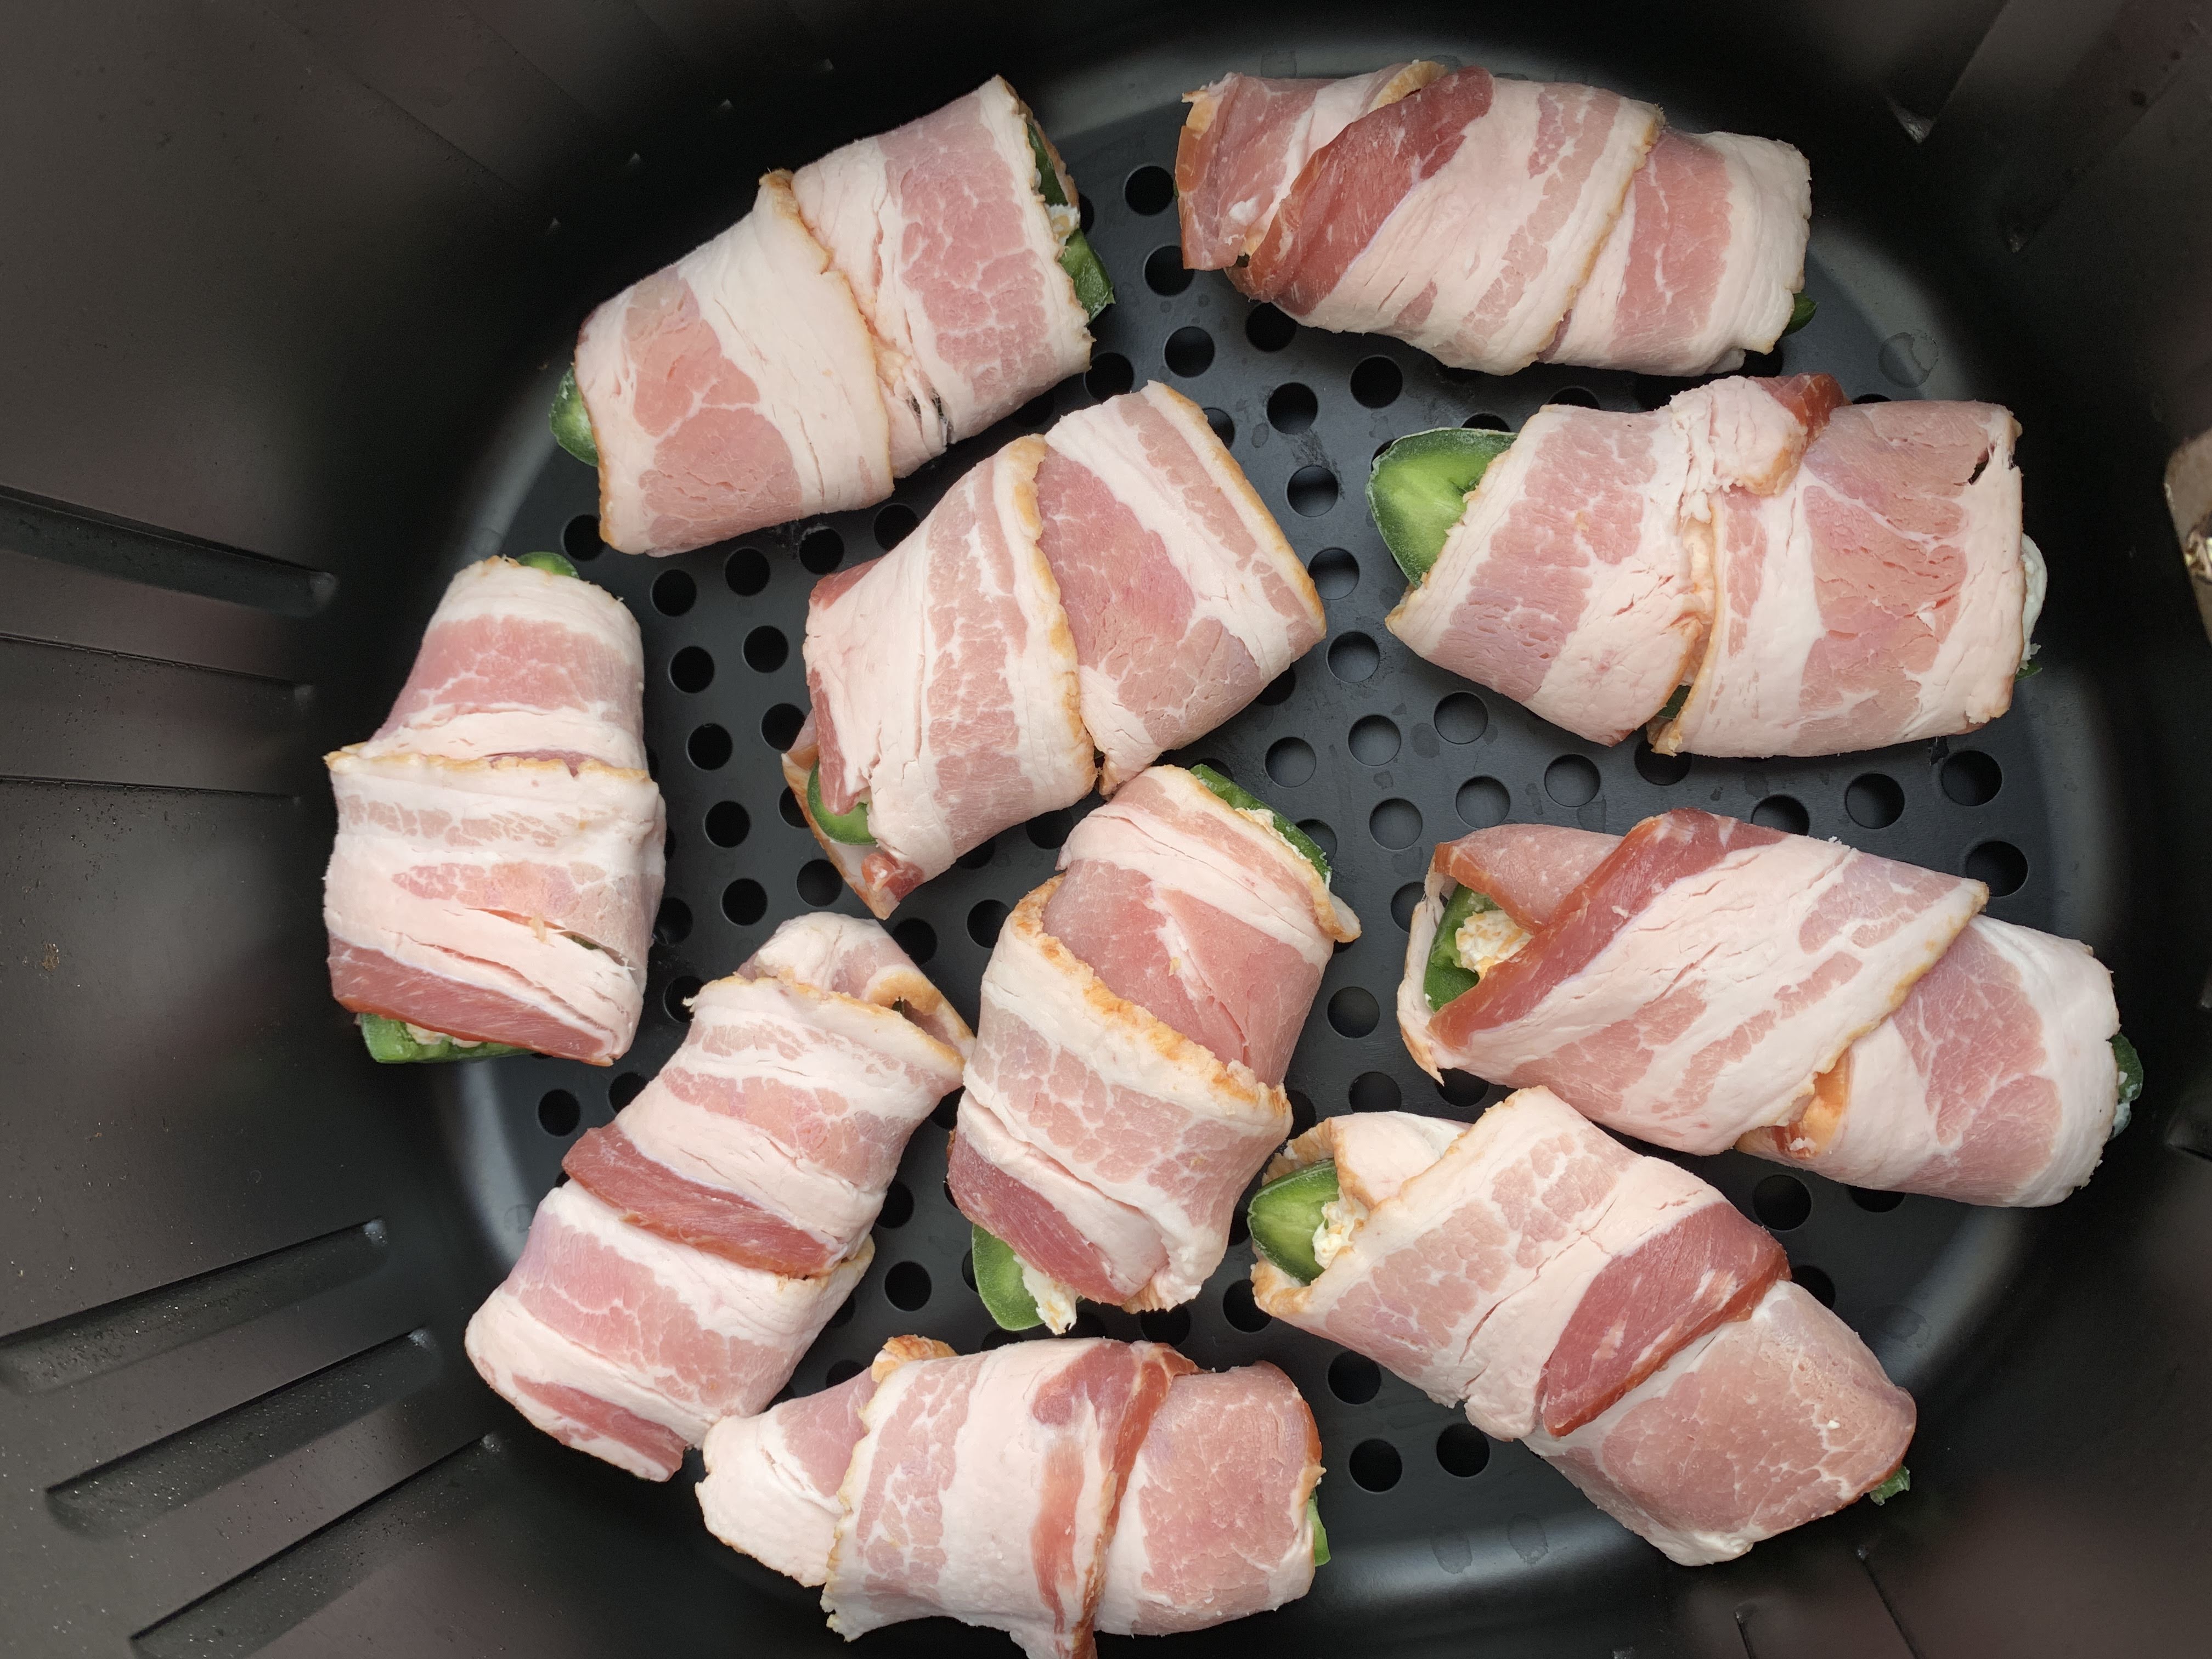 Jalapeno Poppers in the Air Fryer before cooking